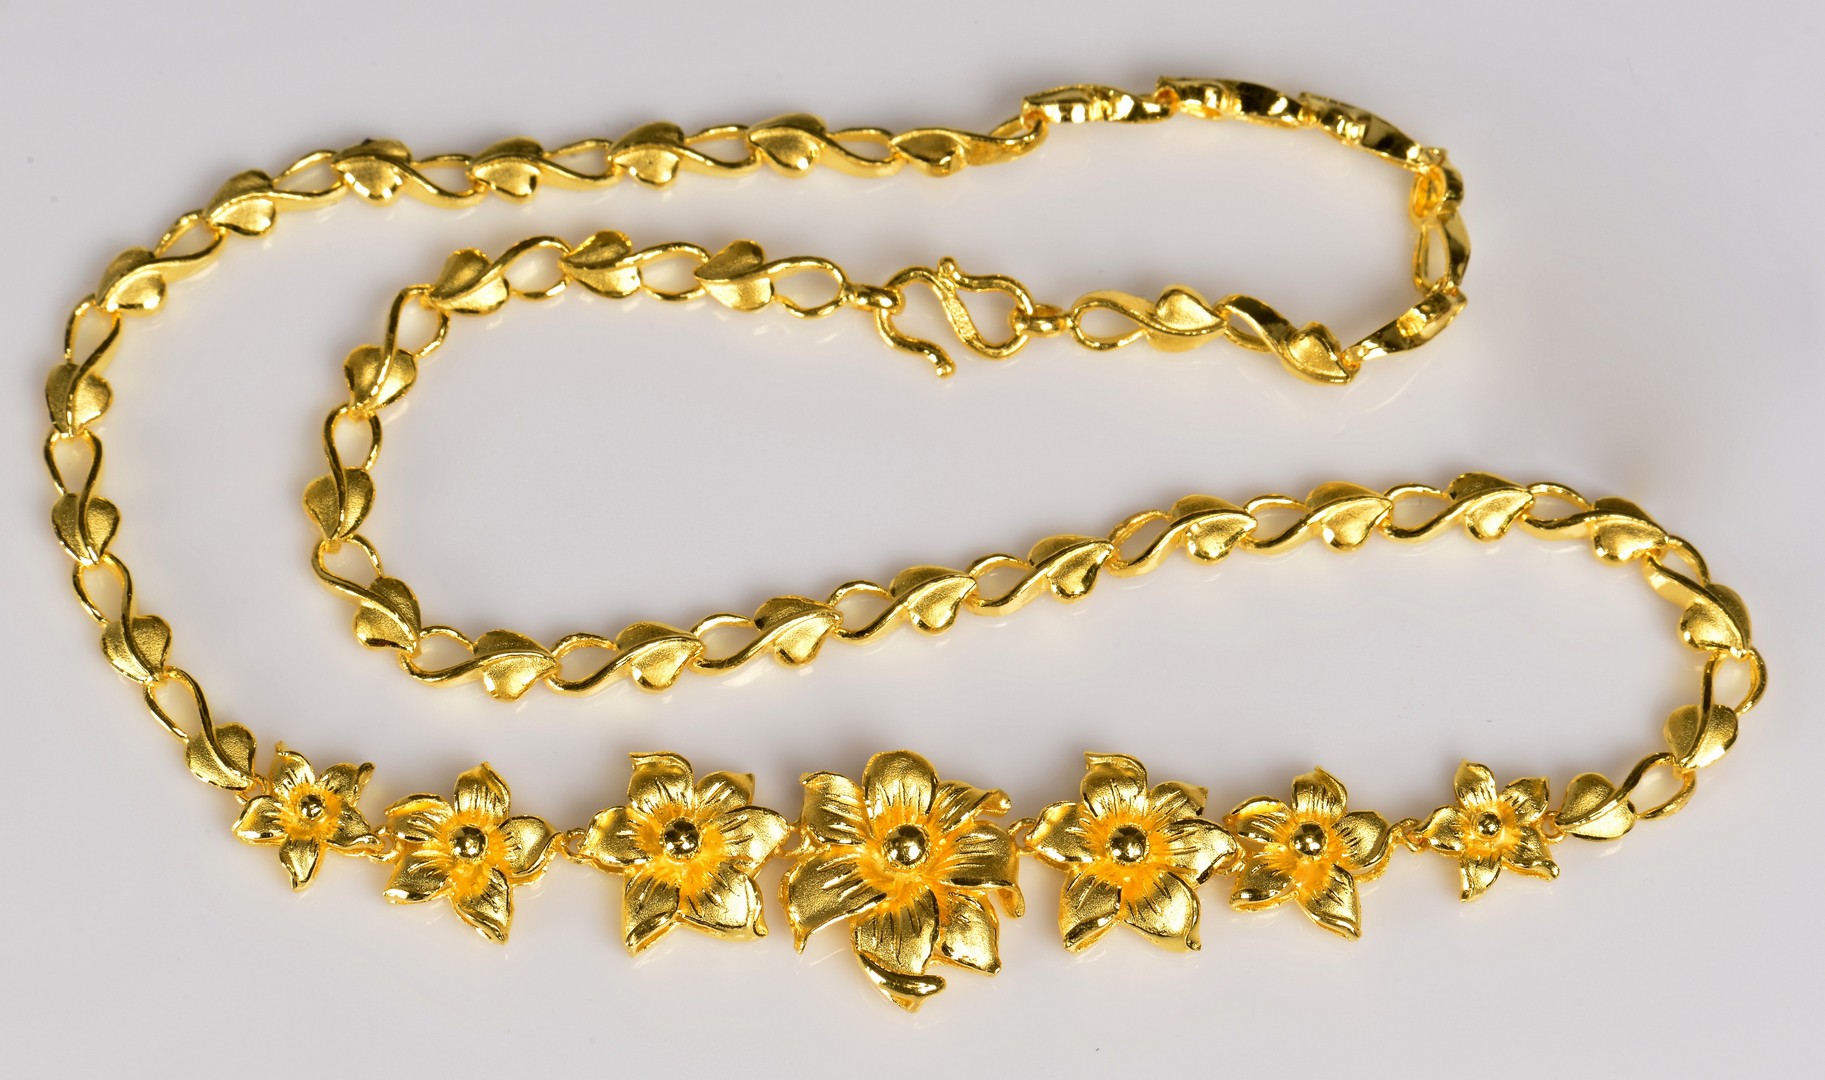 Lot 65: 24K Chinese Necklace, 40.6 grams